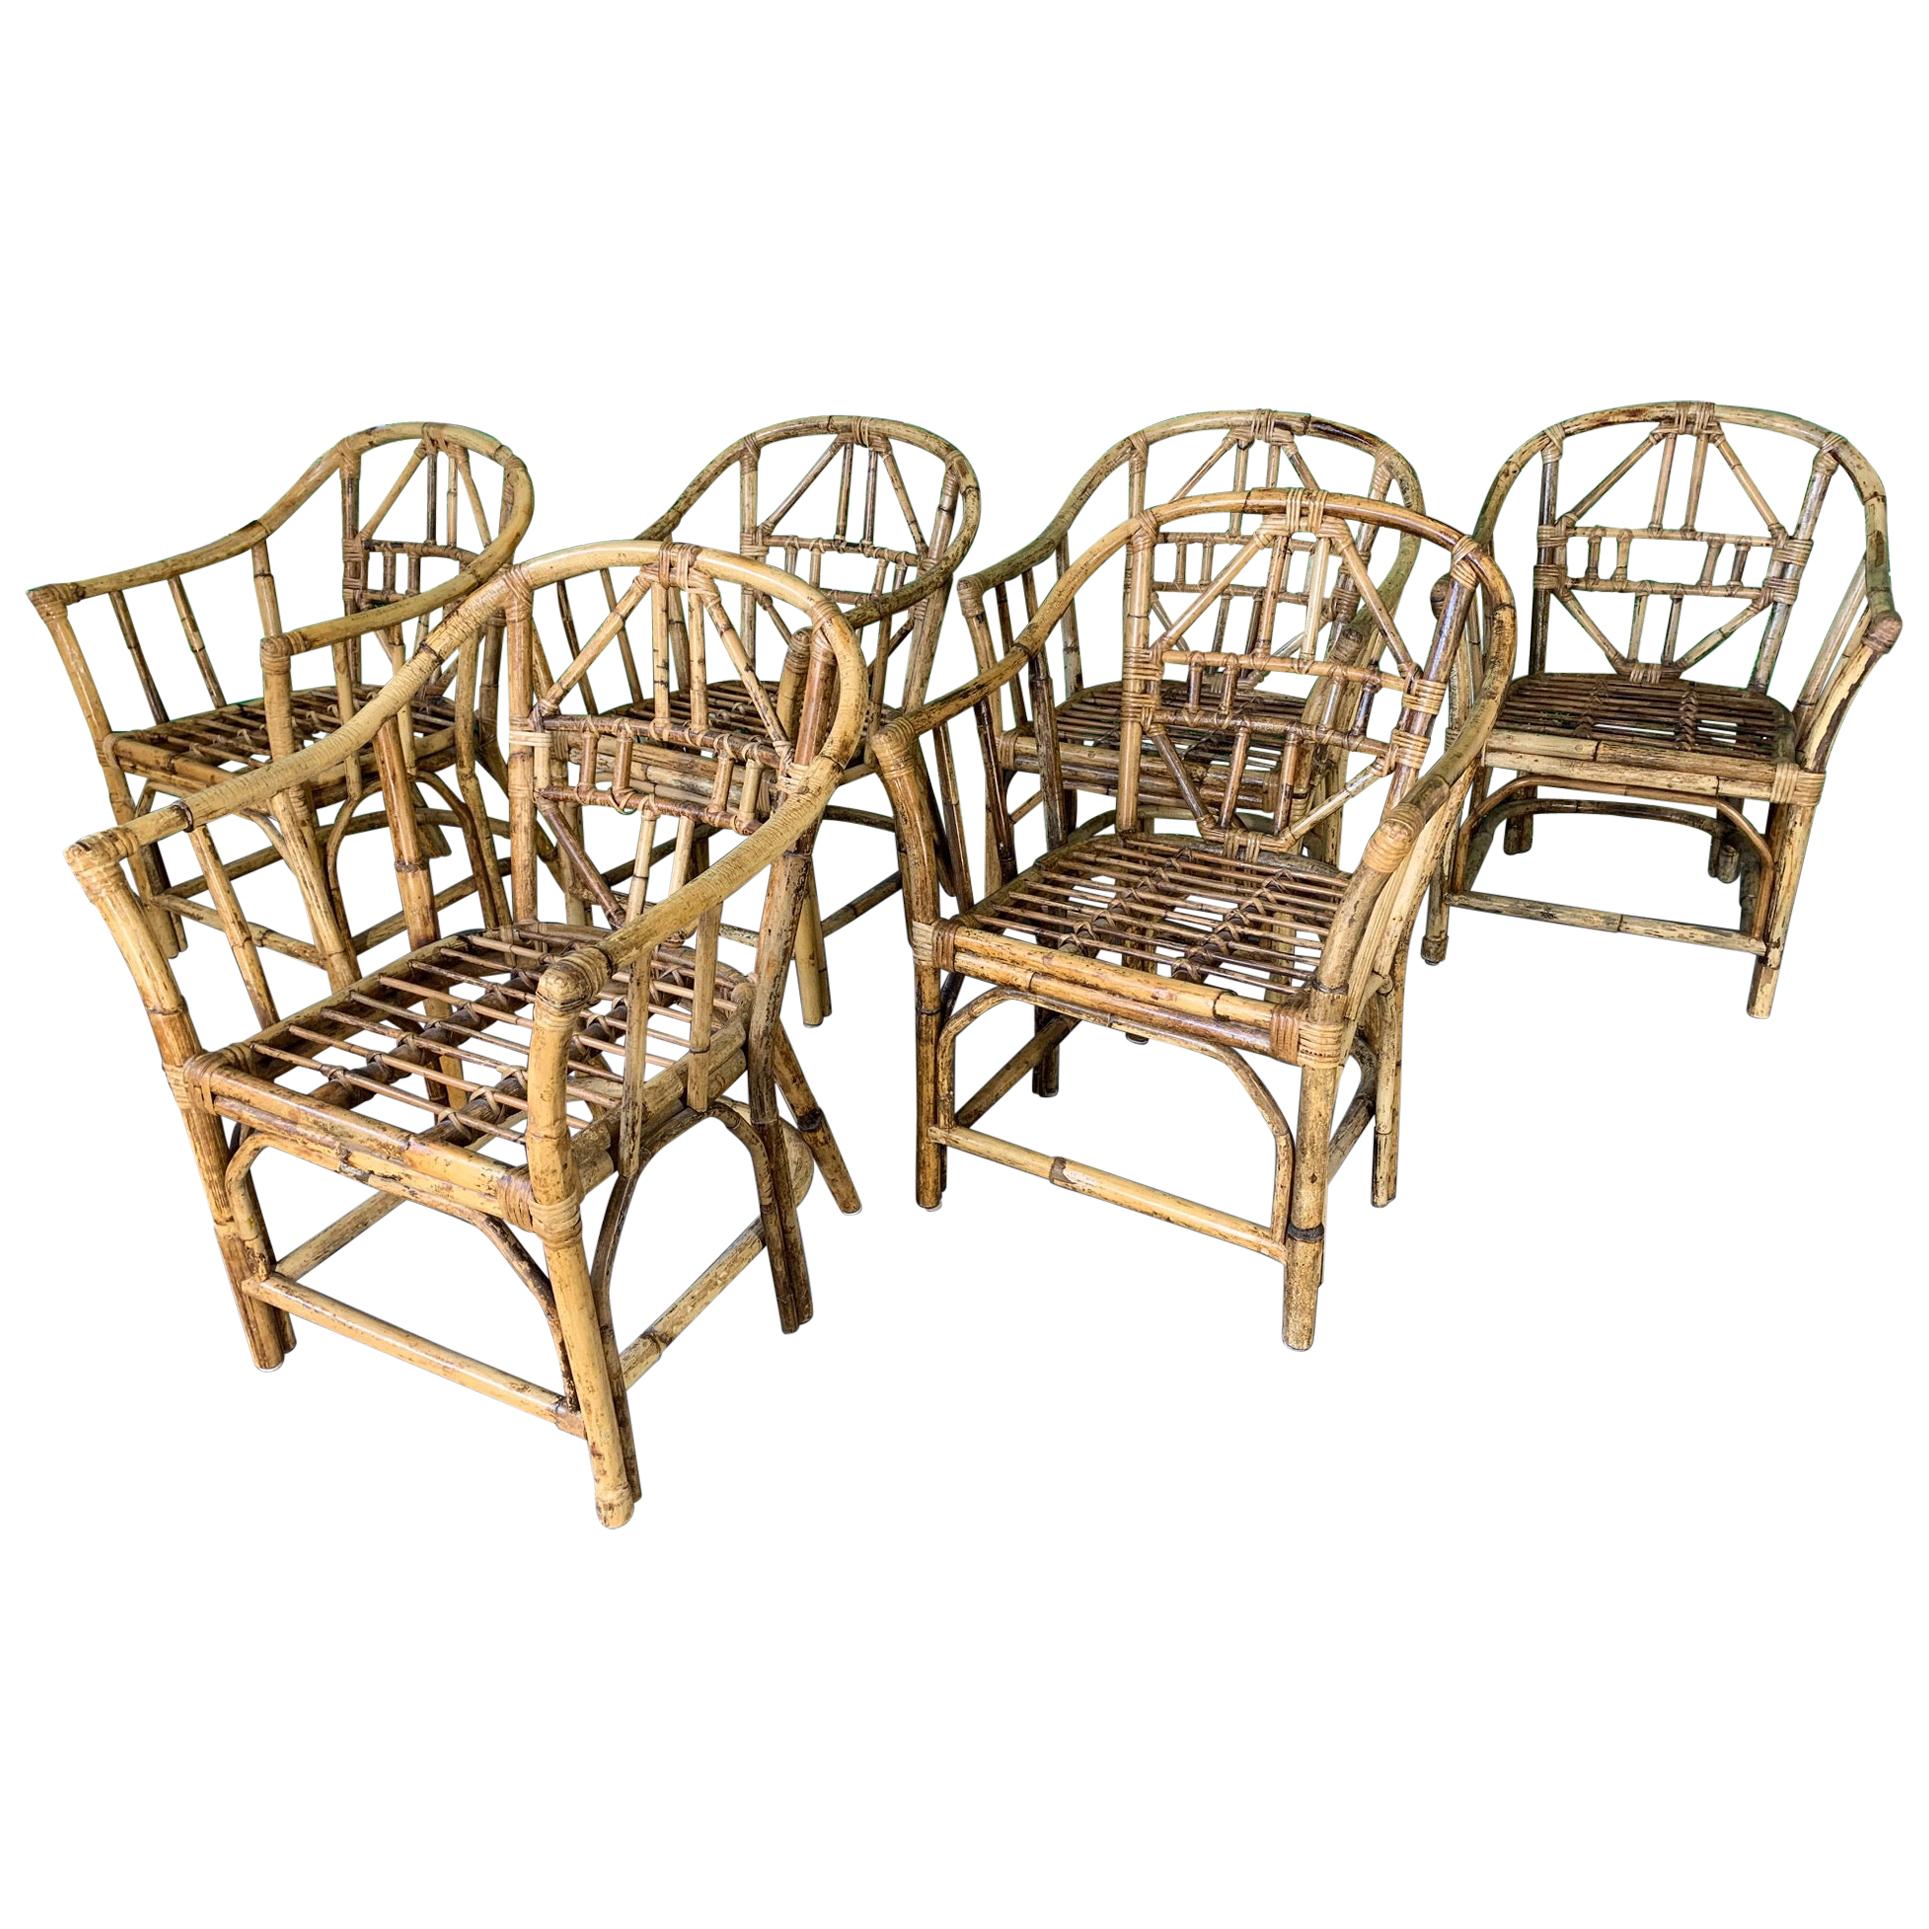 Brighton Pavilion Style Dining Chairs - Set of 6